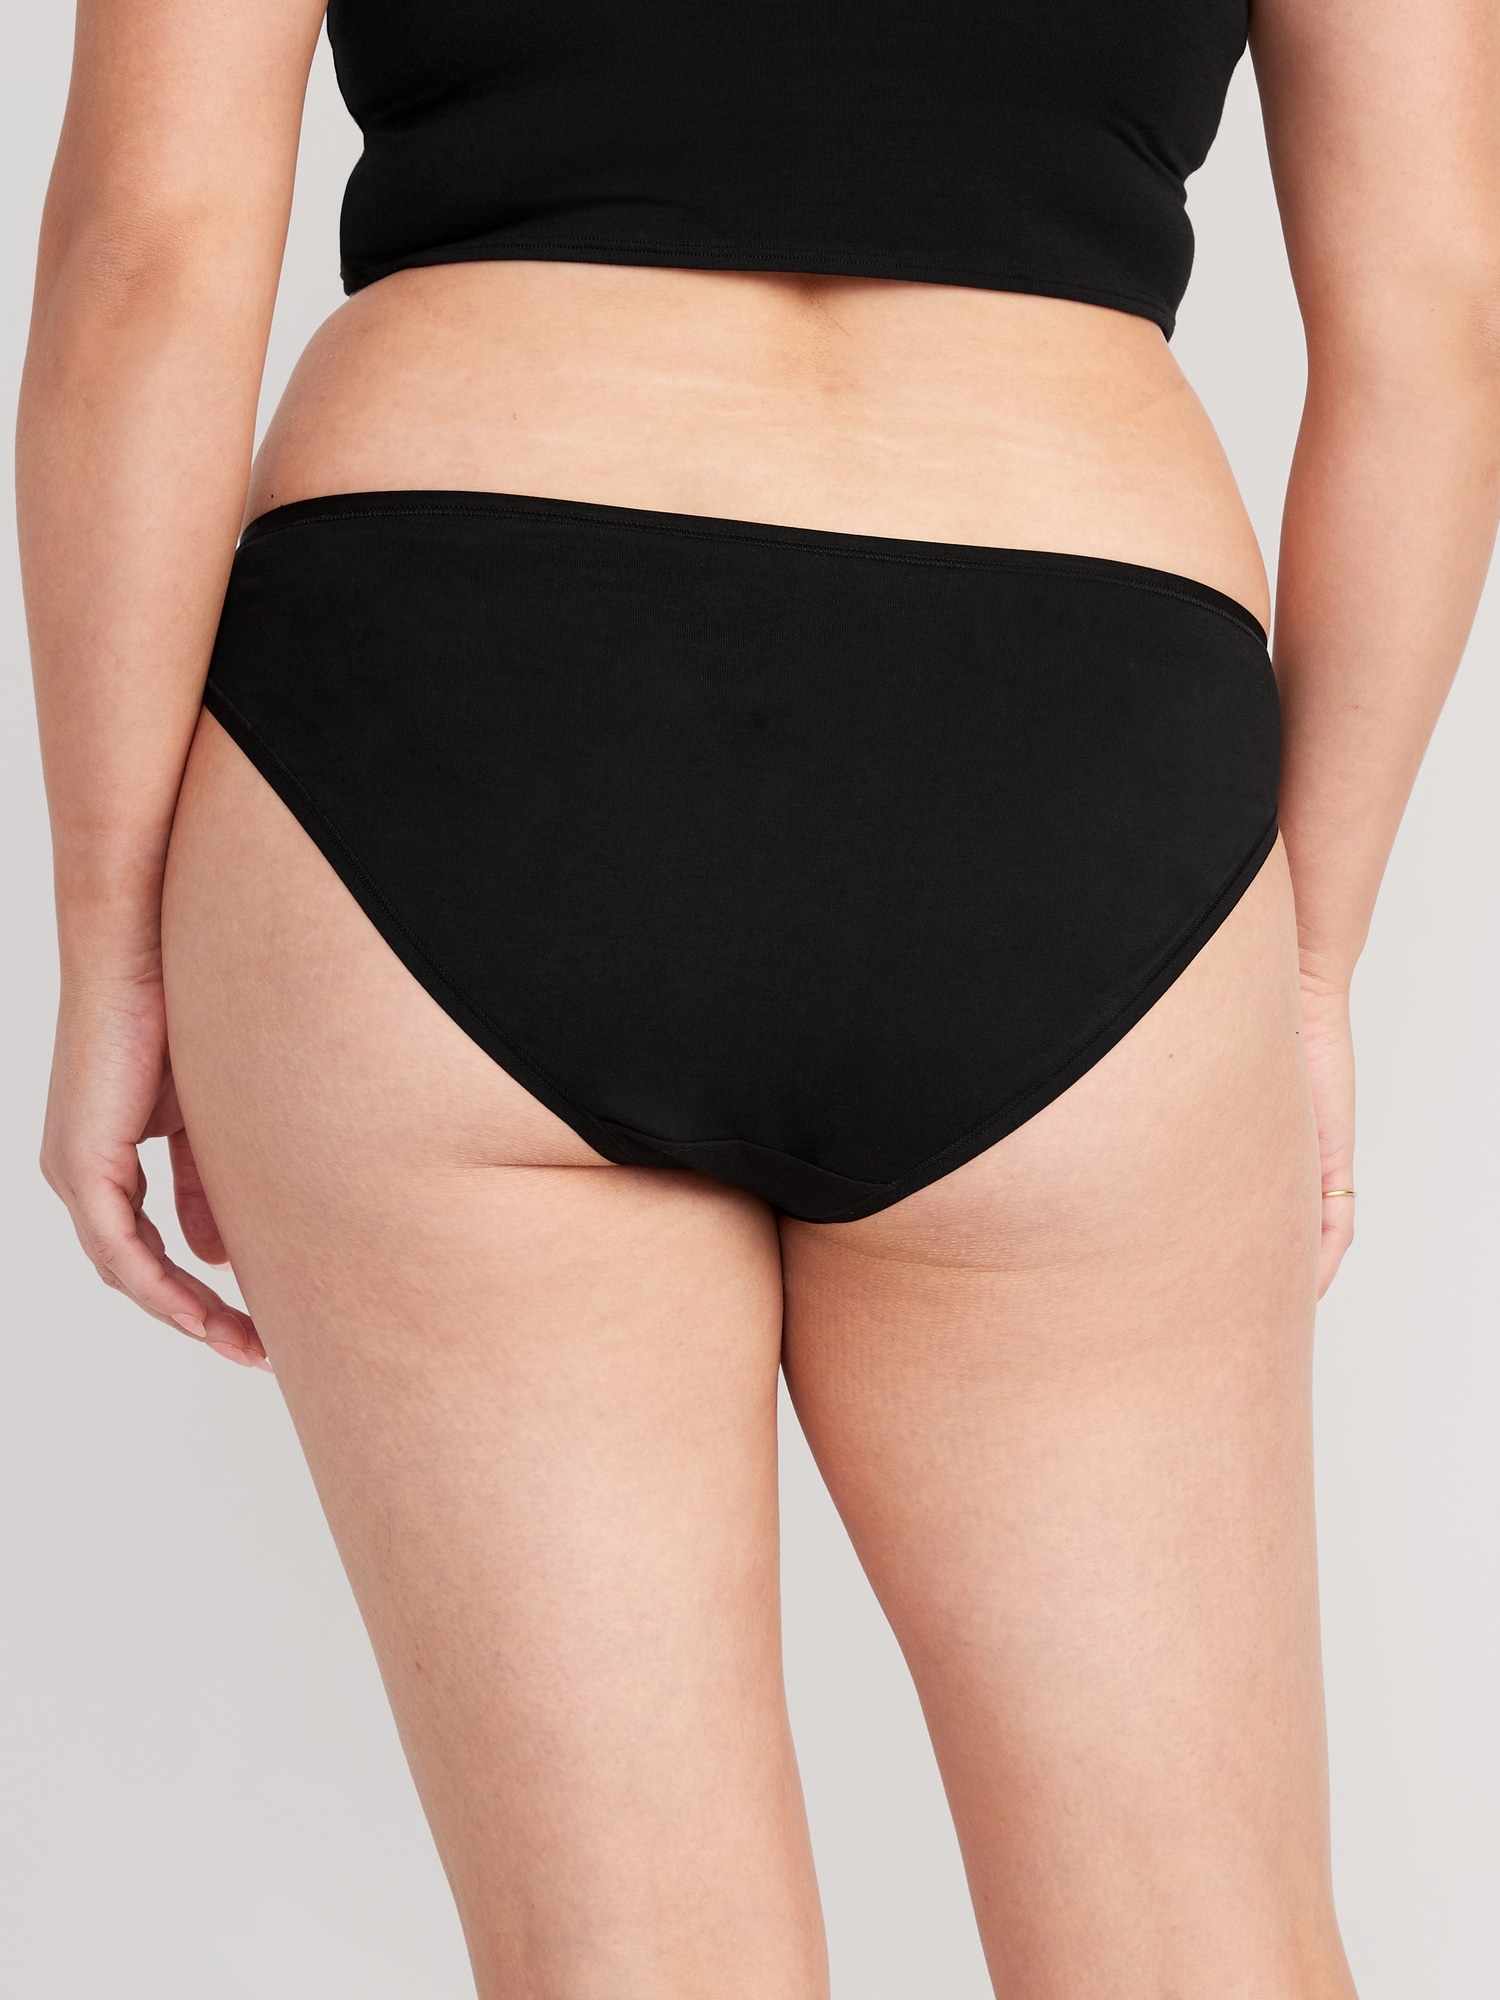 3-Pack Hiphugger Panties in Super Comfy Cotton